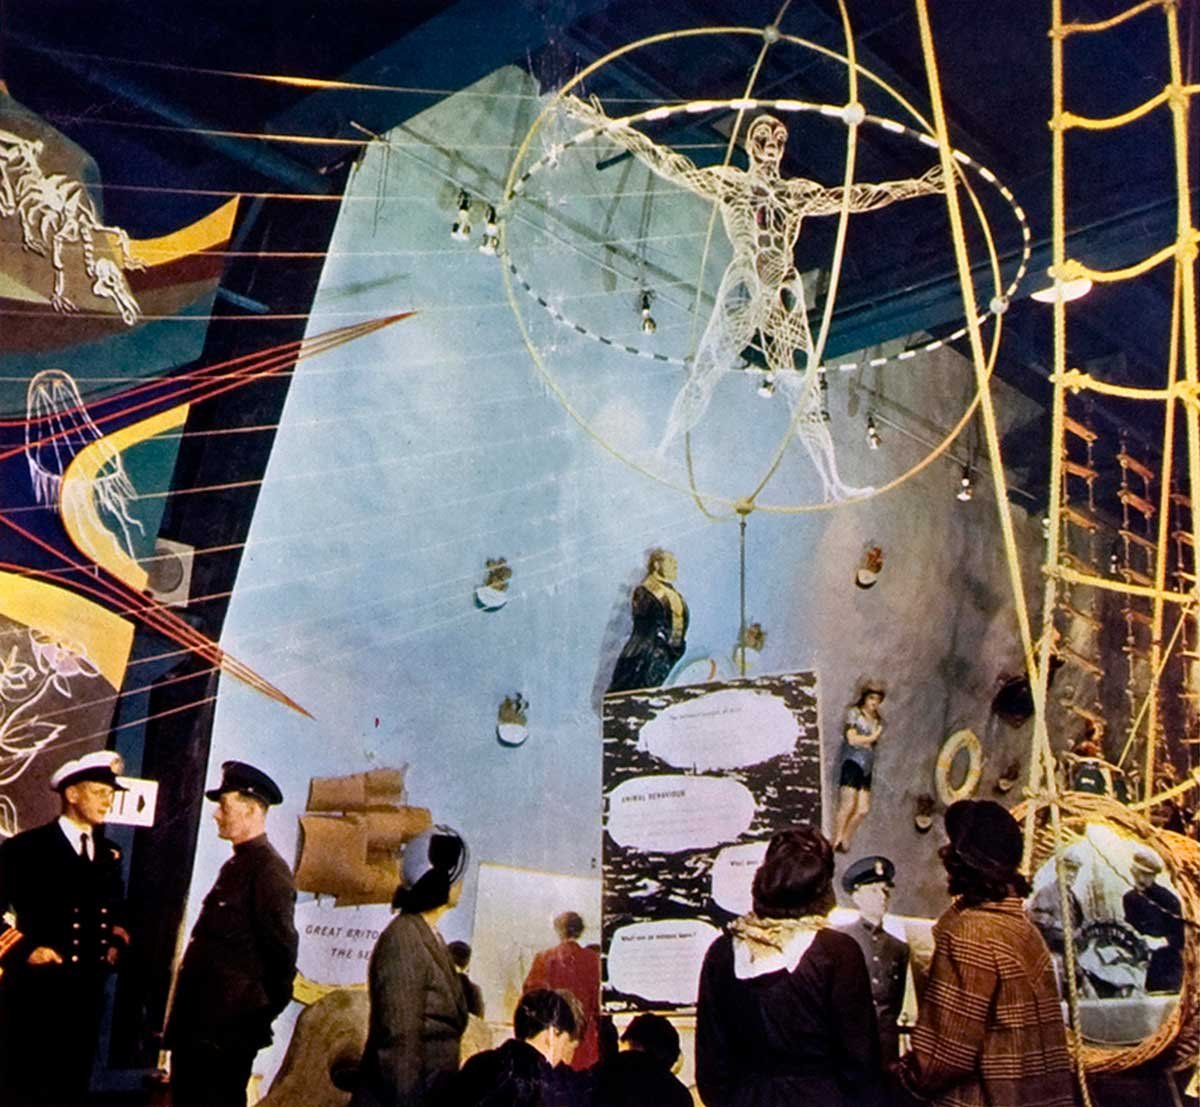 Visitors look at a model of a muscular human form surrounded by gold rings and other exhibits.